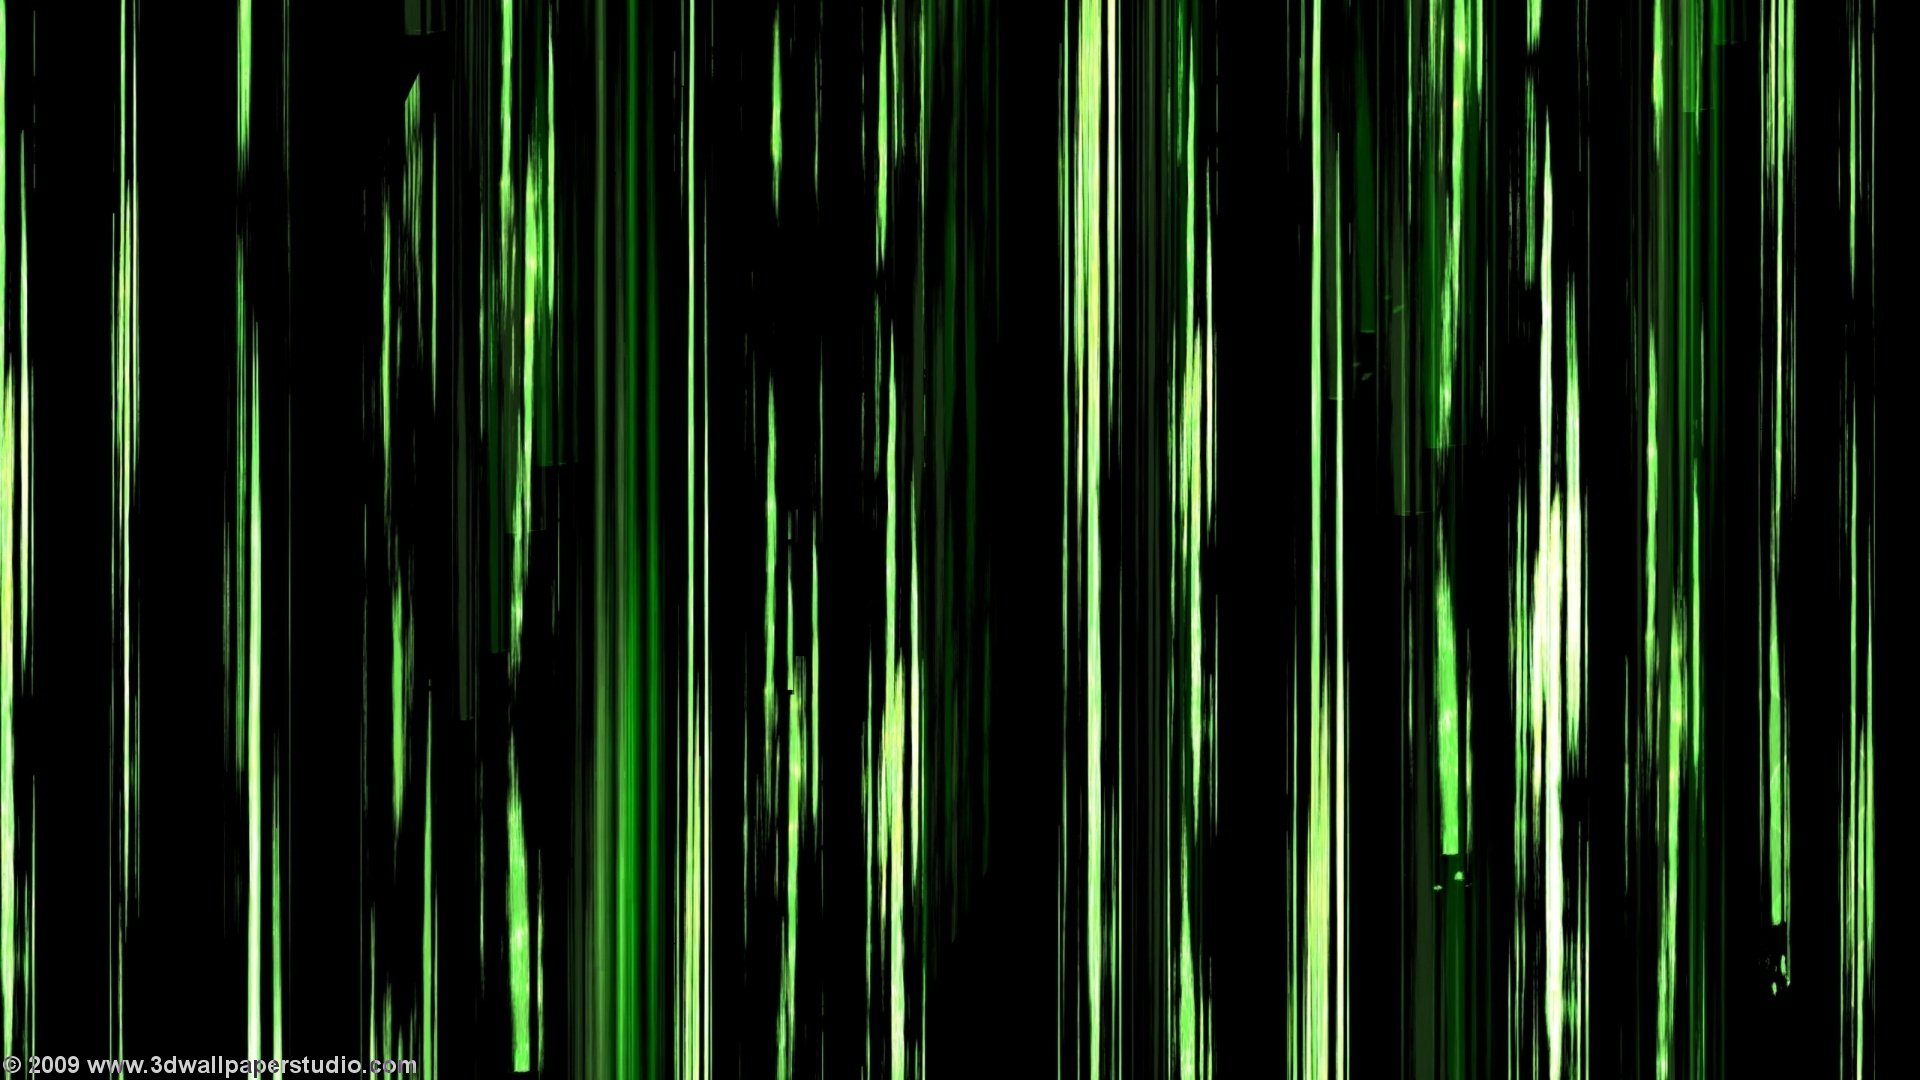 Neon Green and Black Wallpaper submited images